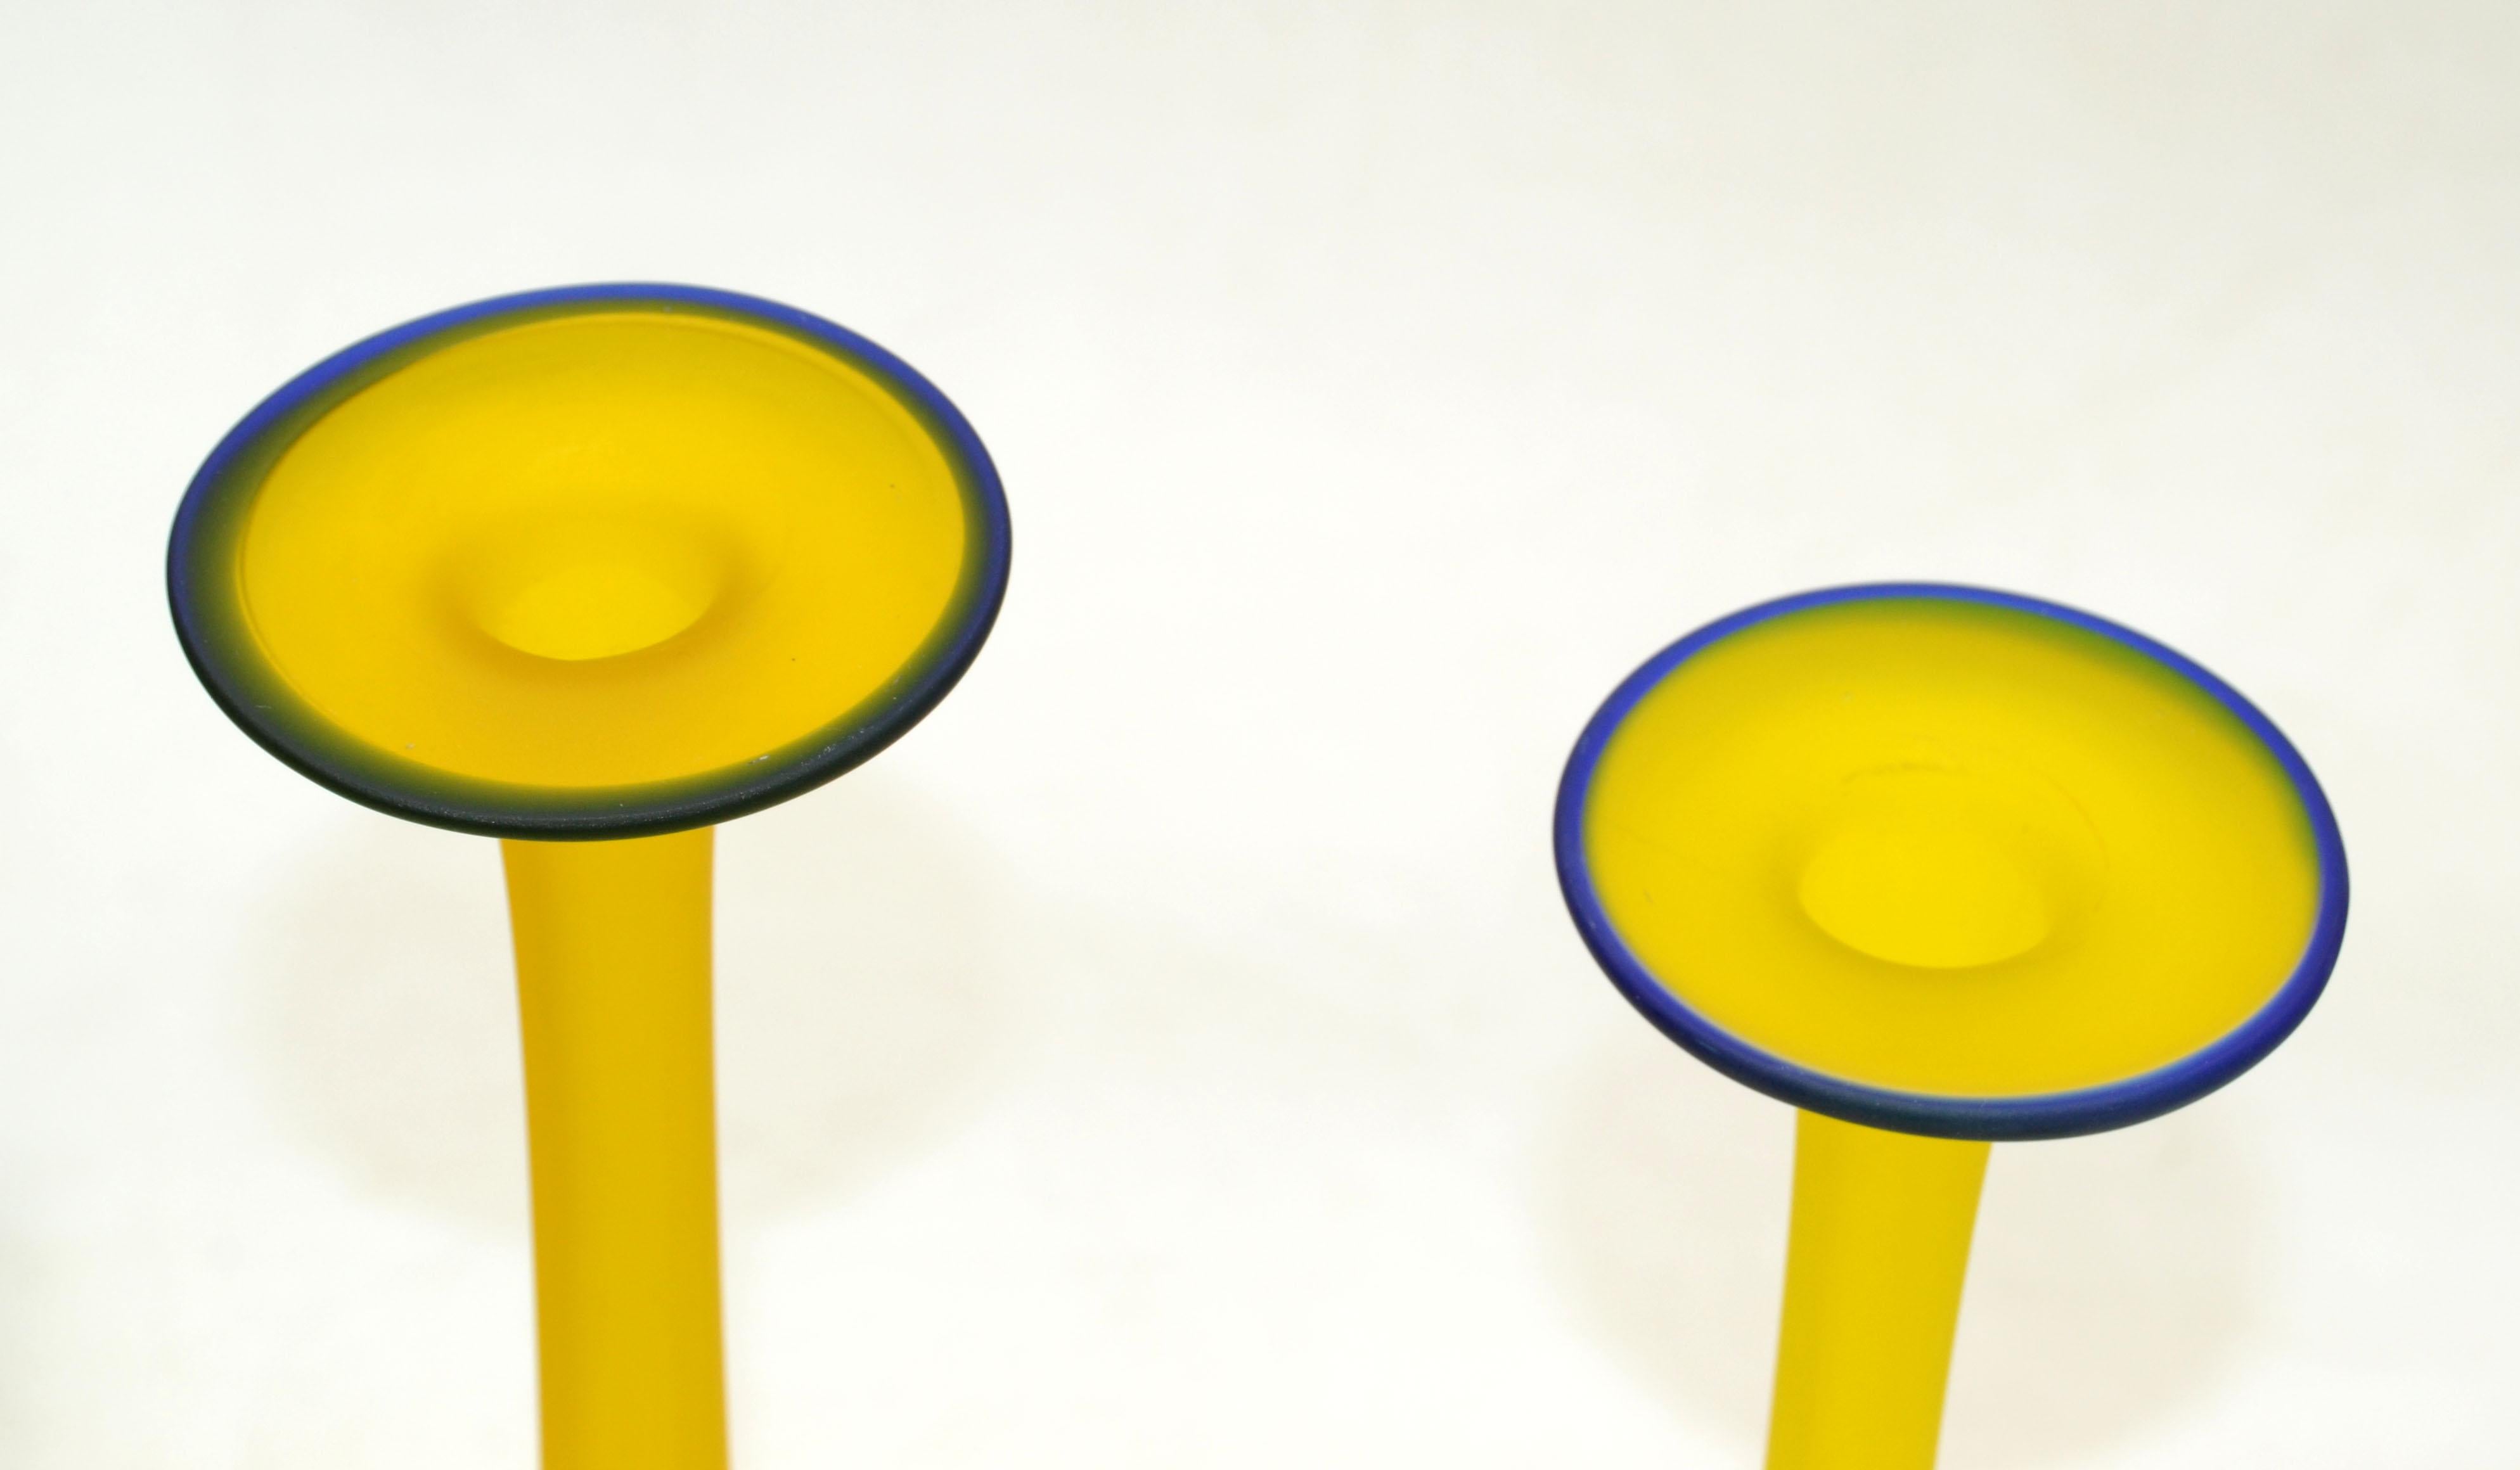 Pair, Mid-Century Modern Translucent Blue and Yellow Satin Glass Bud Vase, Italy In Good Condition For Sale In Miami, FL